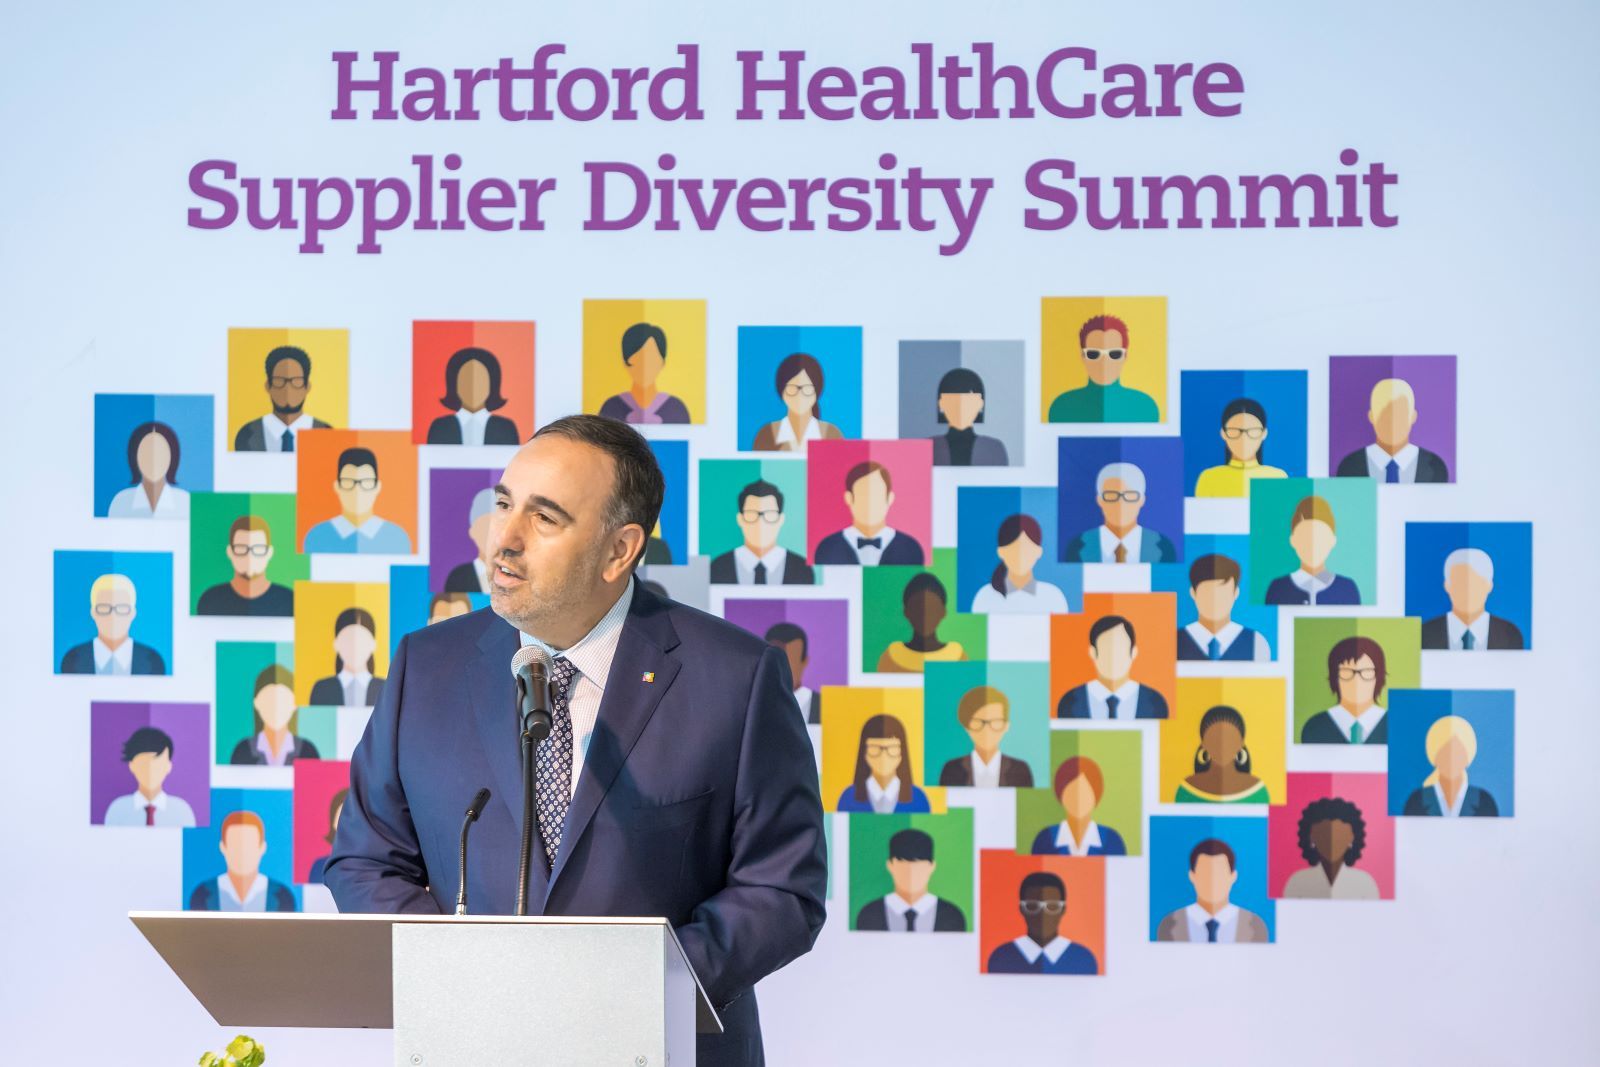 Supplier Diversity Summit Builds Partnerships with Minority and Women-Owned Businesses